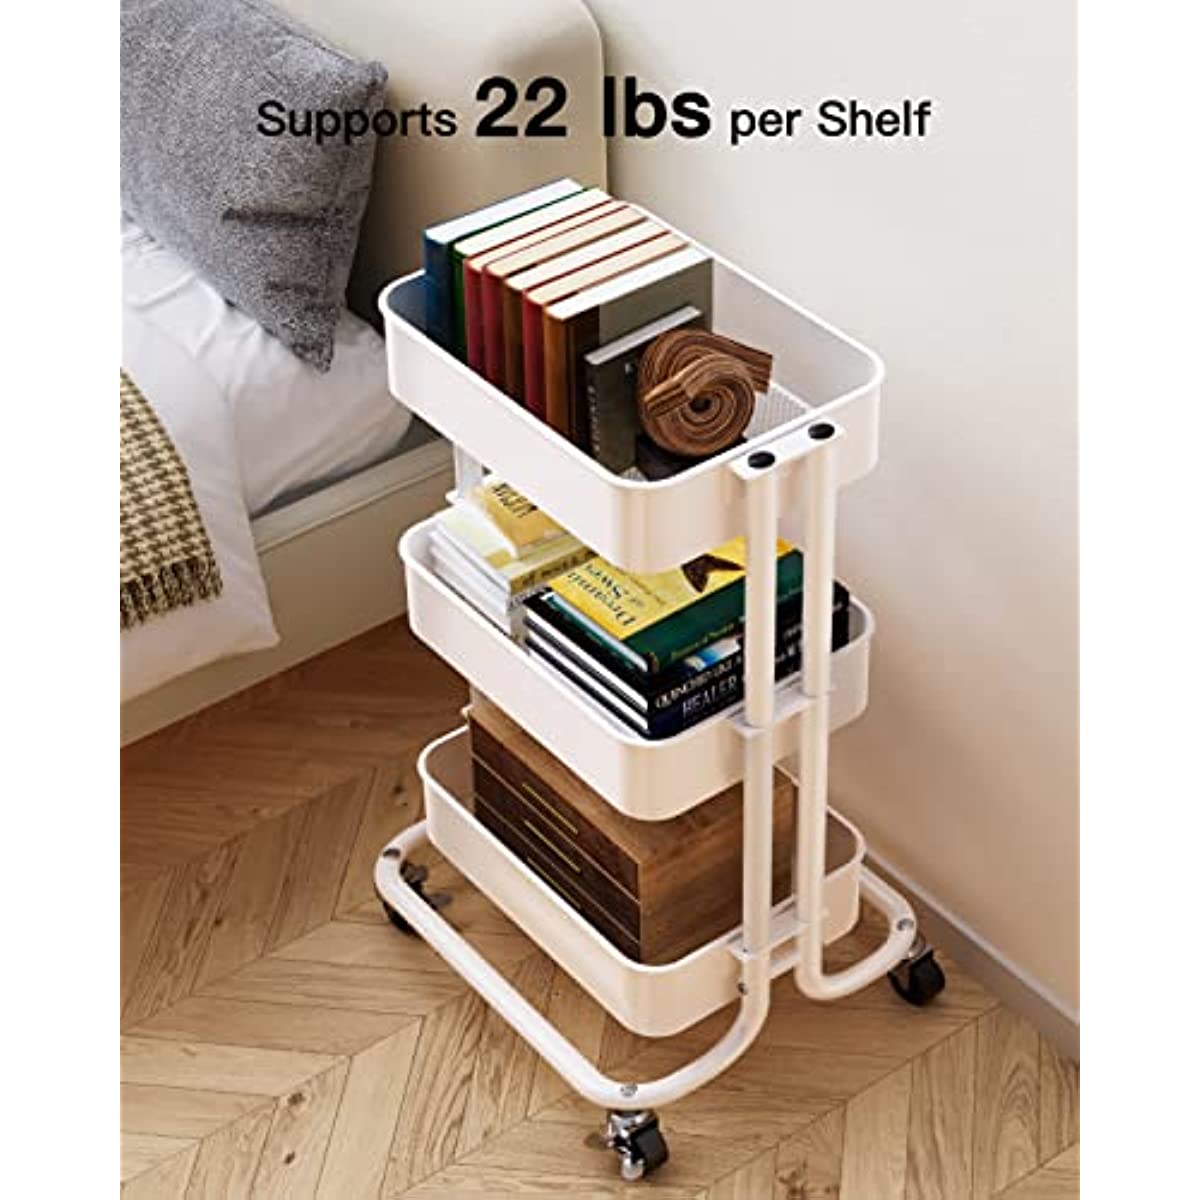 Metal Rolling Utility Cart 3-Tier， Heavy Duty Storage Cart with 2 Lockable Wheels， Multifunctional Mesh Organization Cart for Kitchen Dining Room Living Room (White)